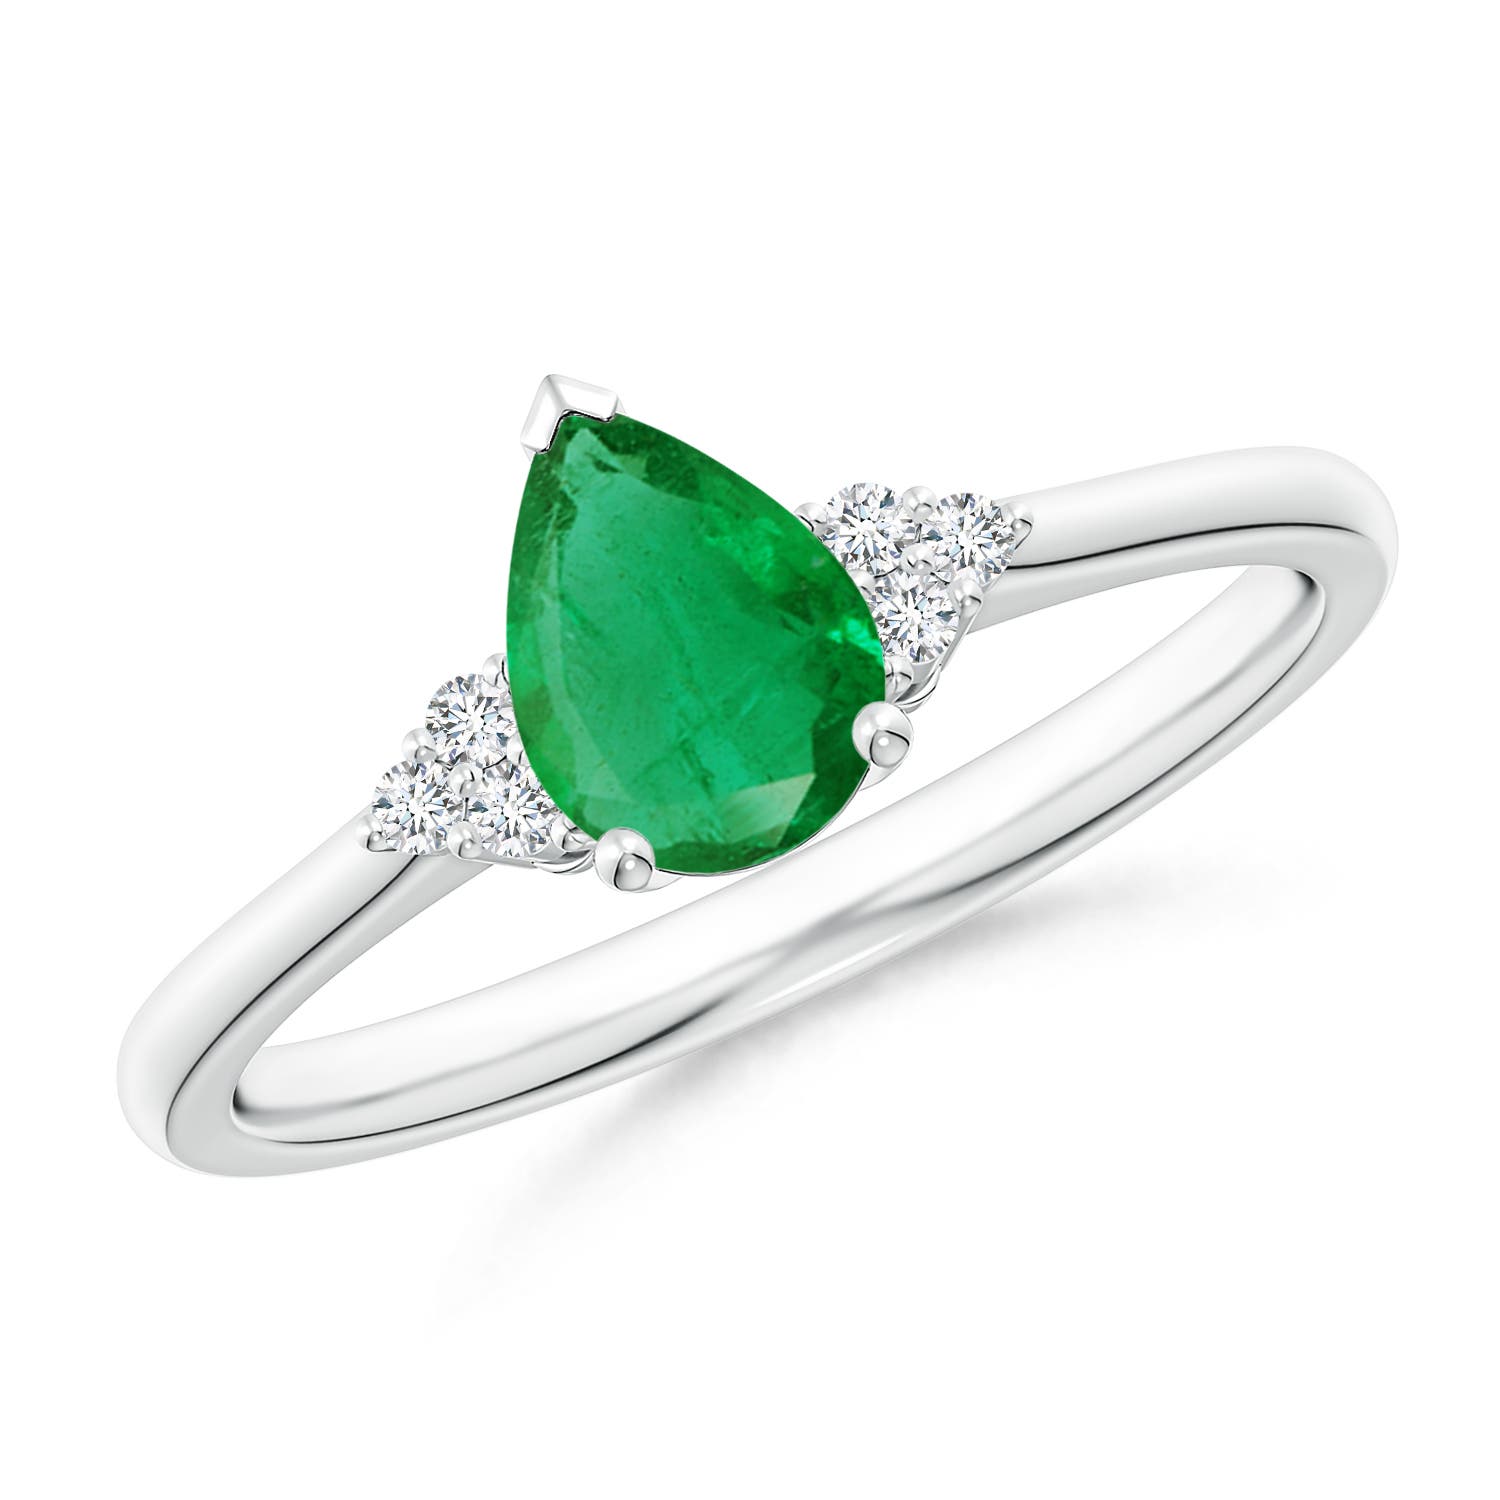 AA - Emerald / 0.66 CT / 14 KT White Gold